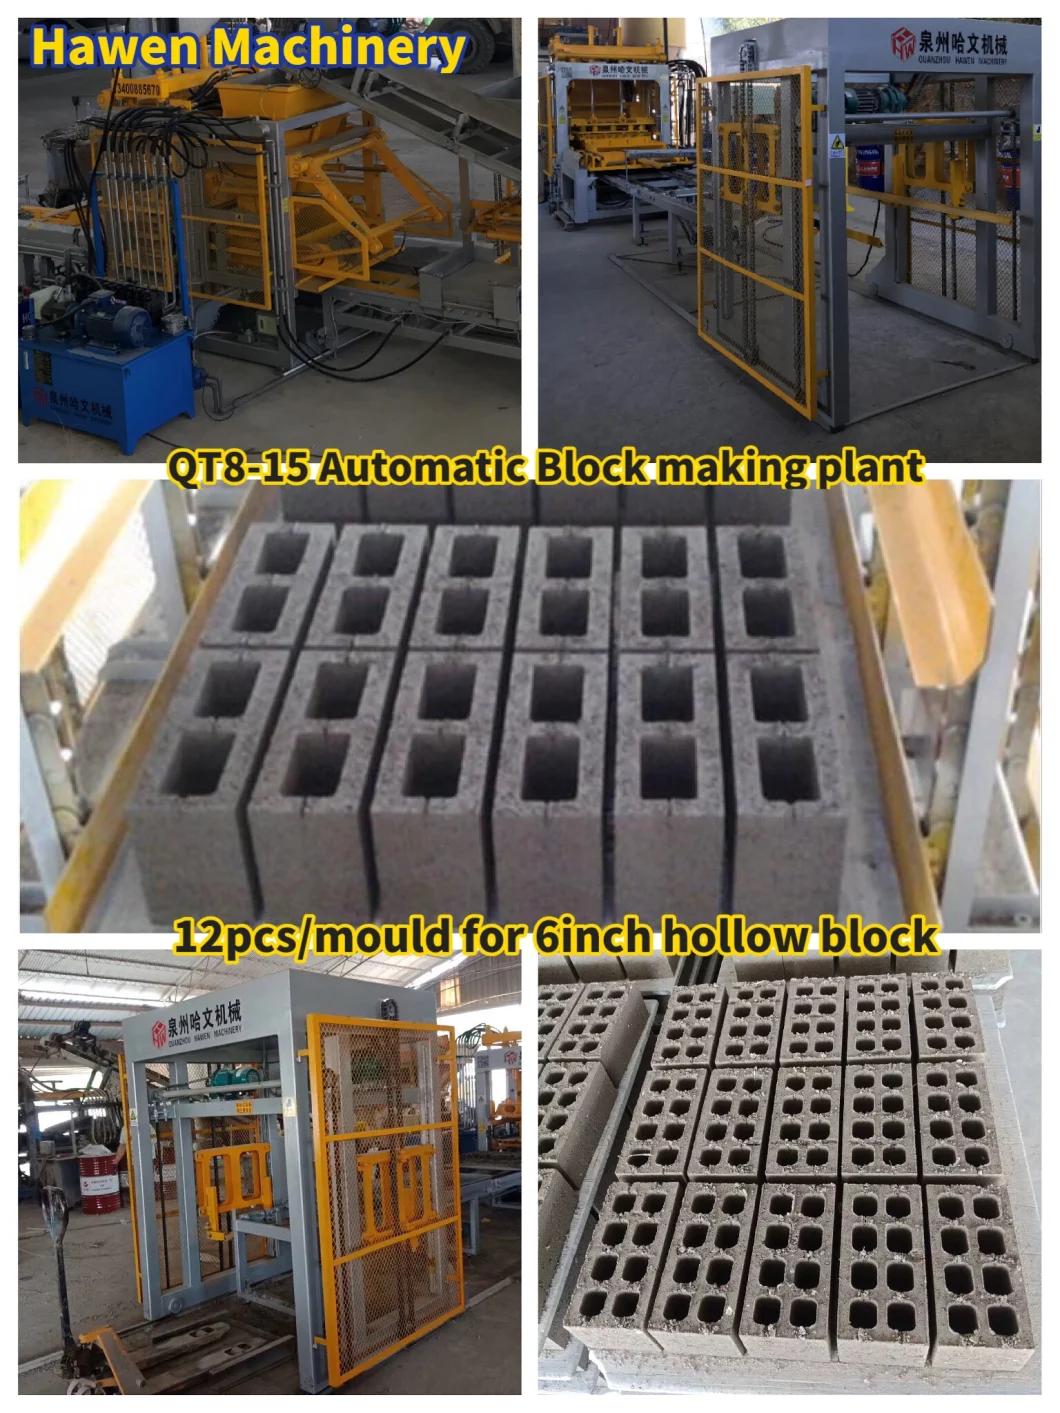 China Supplier for Good Quality Competitive Price Concrete Block Brick Paver Making Machine